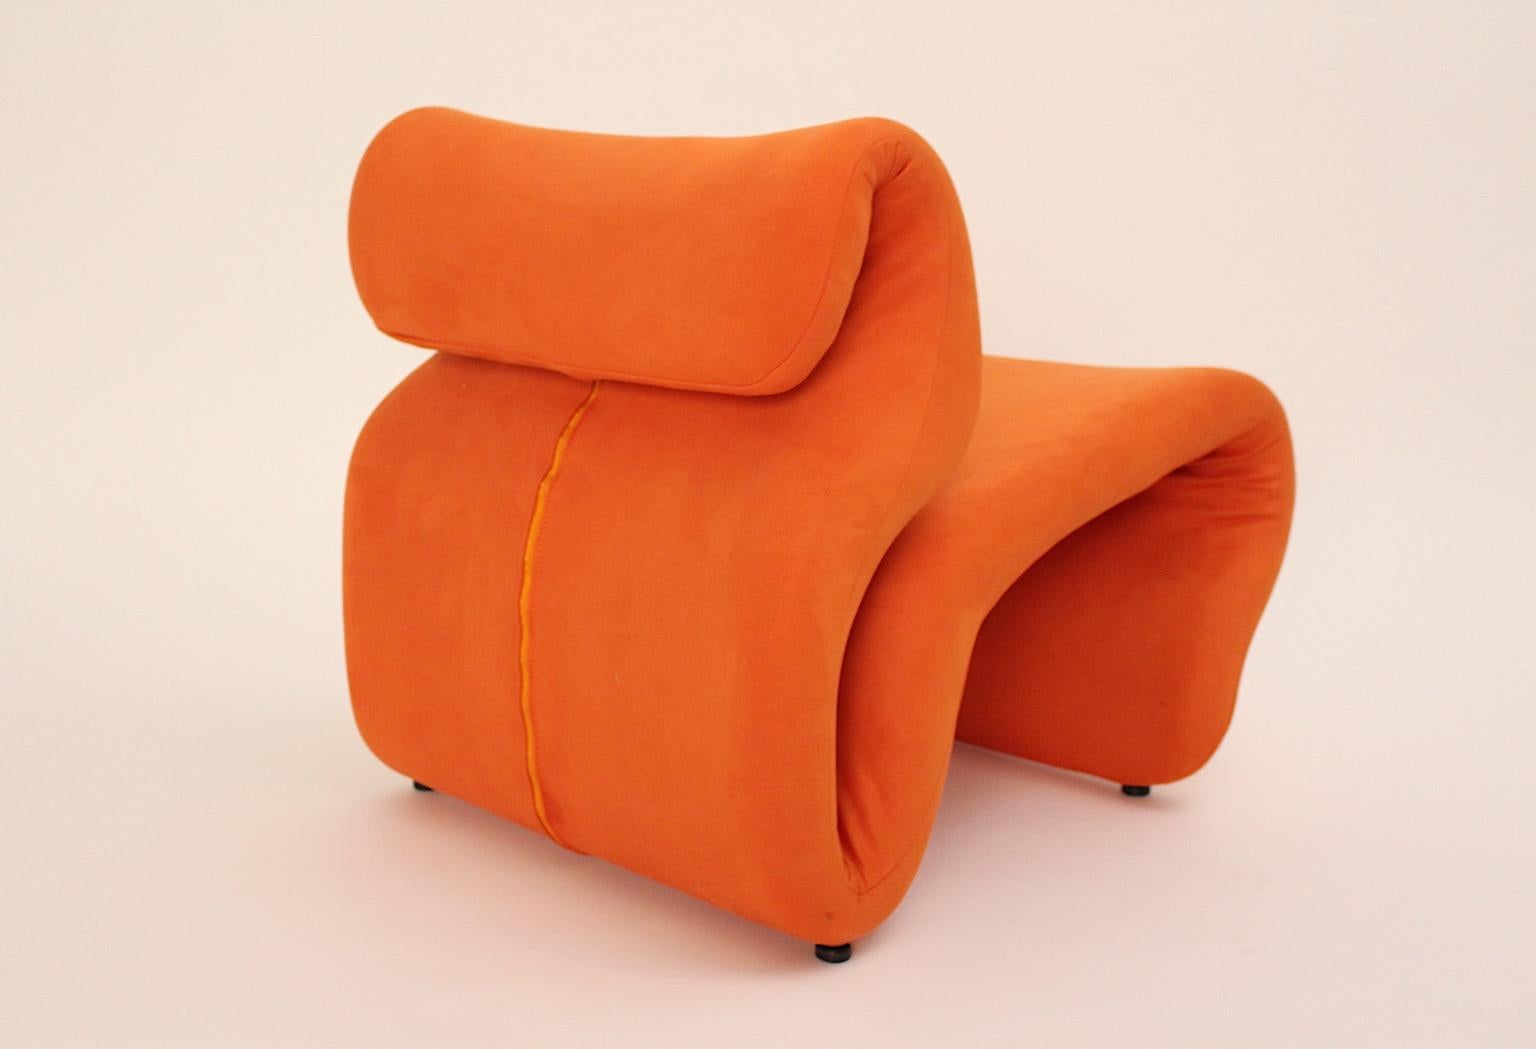 Space Age vintage sculptural iconic orange etcetera chair or lounge chair by Jan Ekselius designed 1970s Sweden.
The chair is reupholstered and covered with orange textile stretch fabric, backside with a zip. 
Black plastic feet
Good condition with